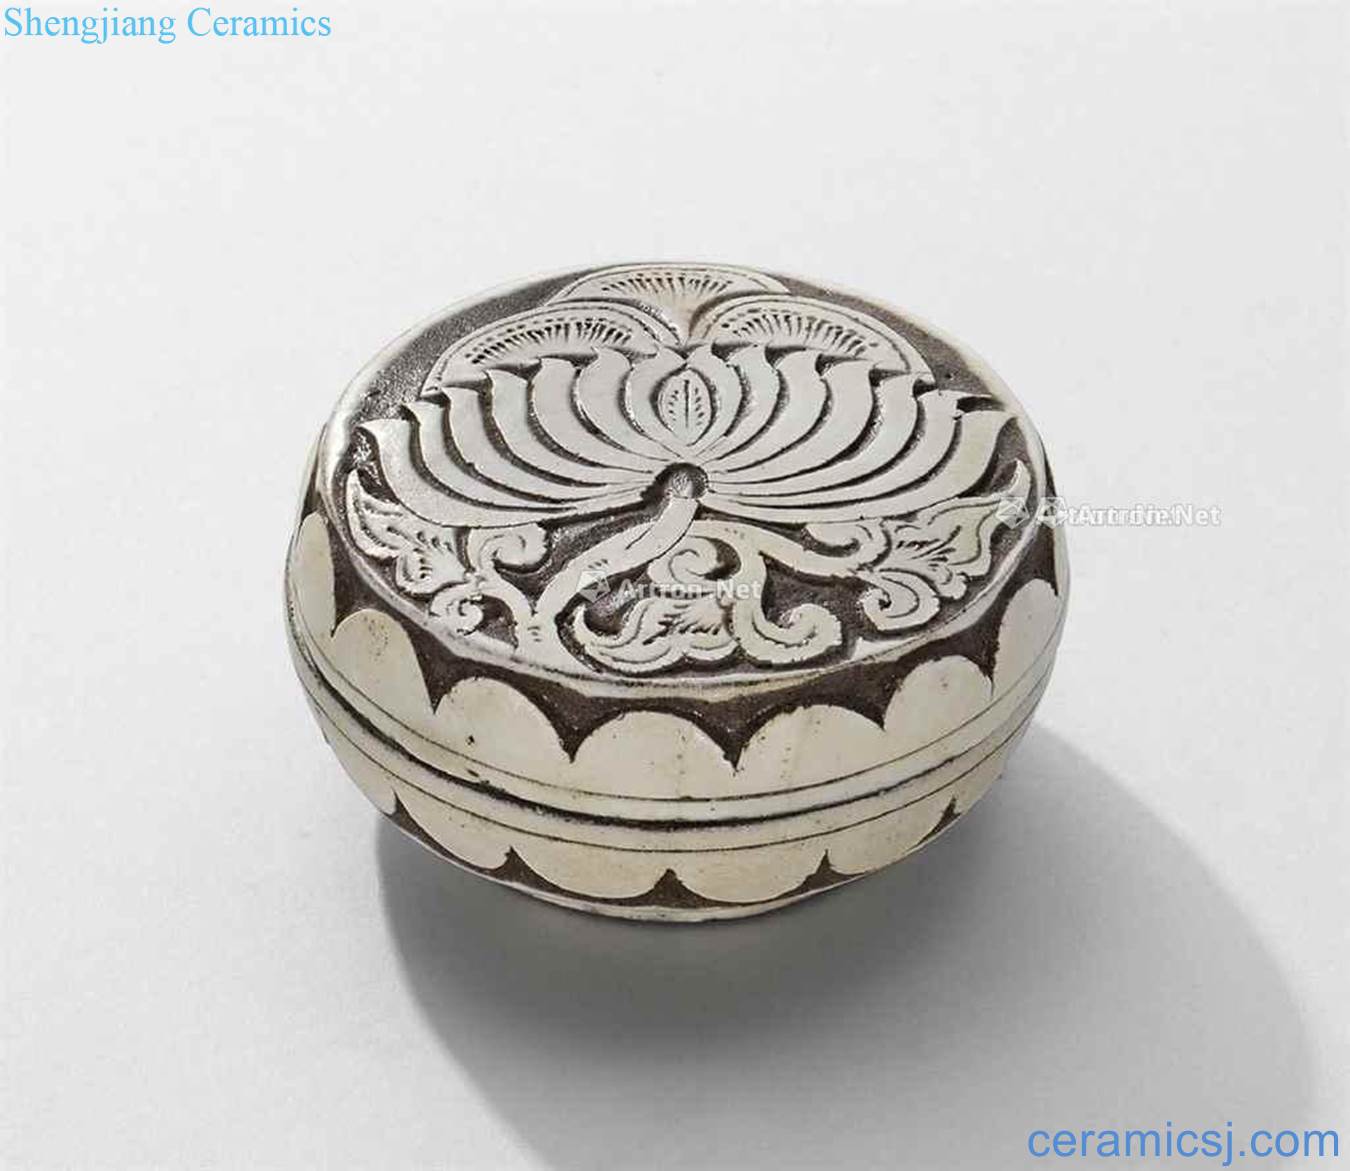 Stuck between northern song dynasty took deep engraved fold branch lines cover box flowers